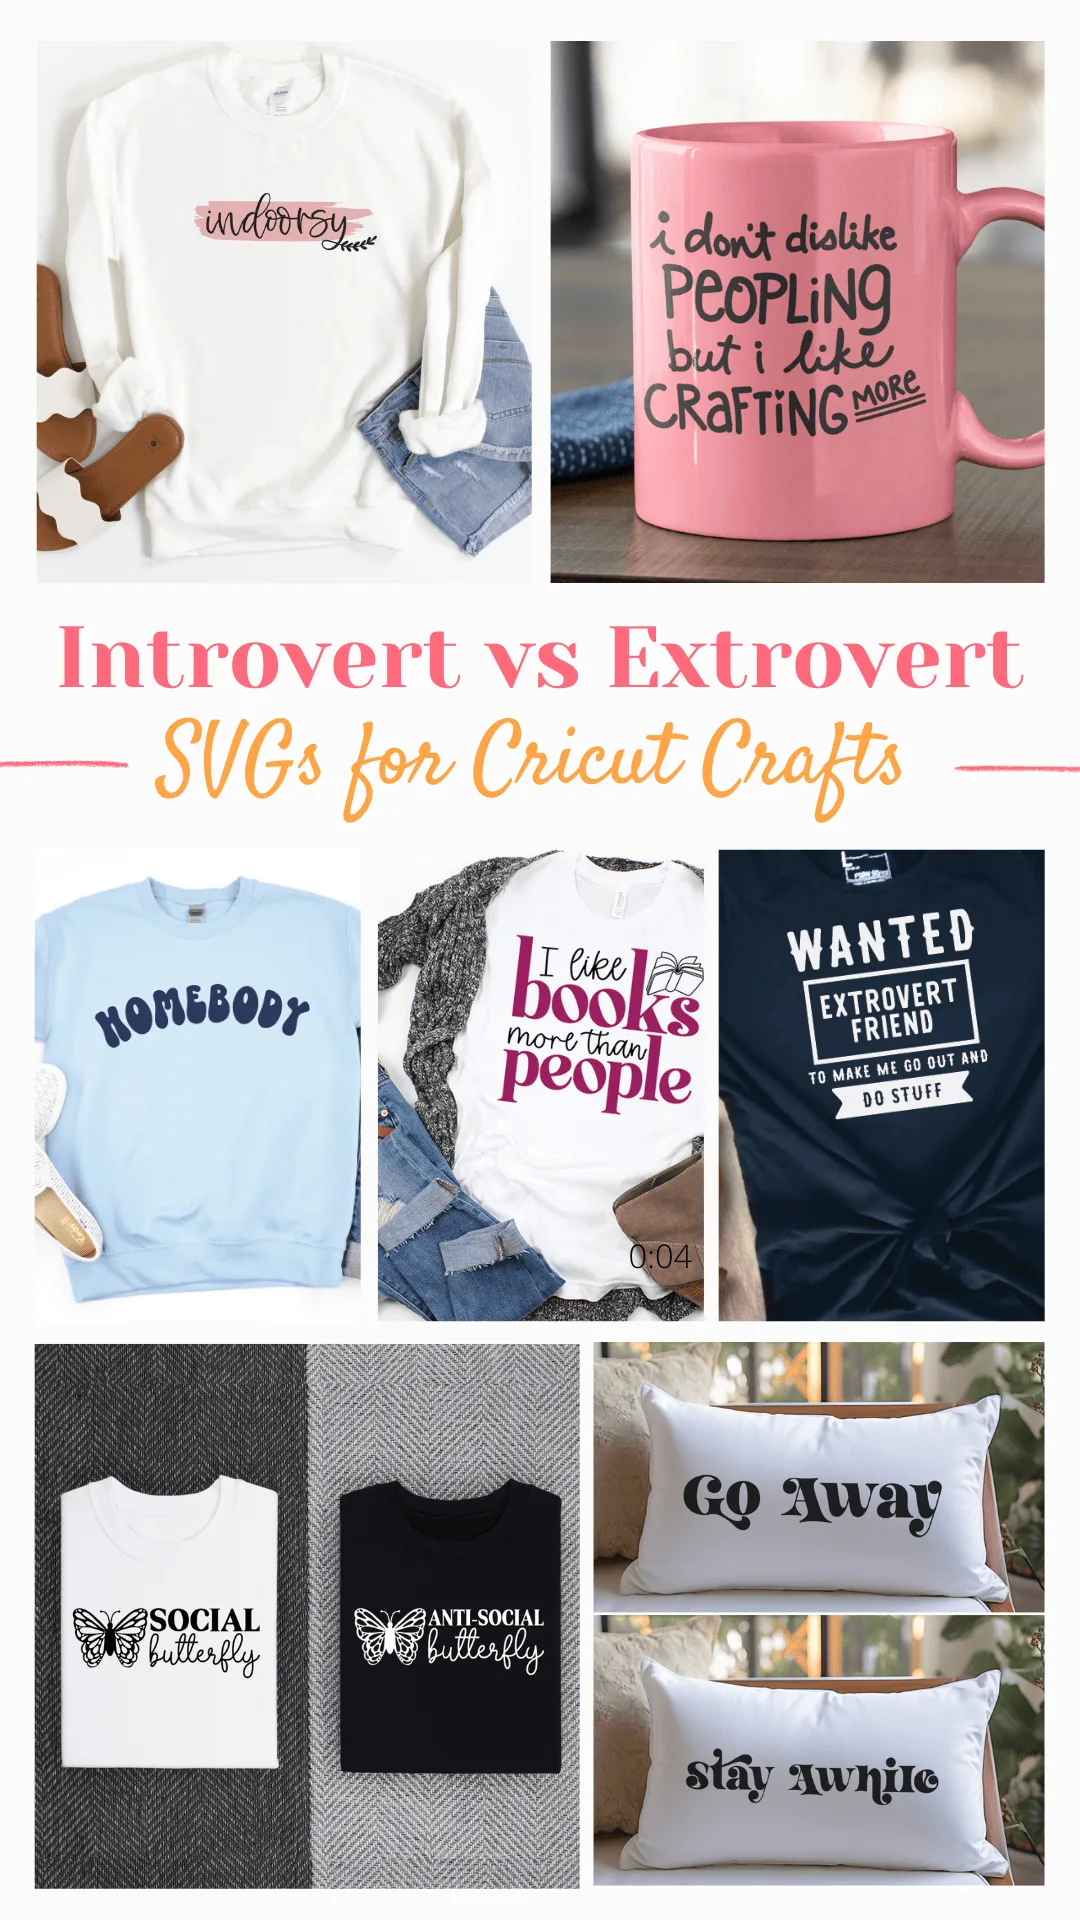 Introvert vs Extrovert SVG files for your Cricut Crafts